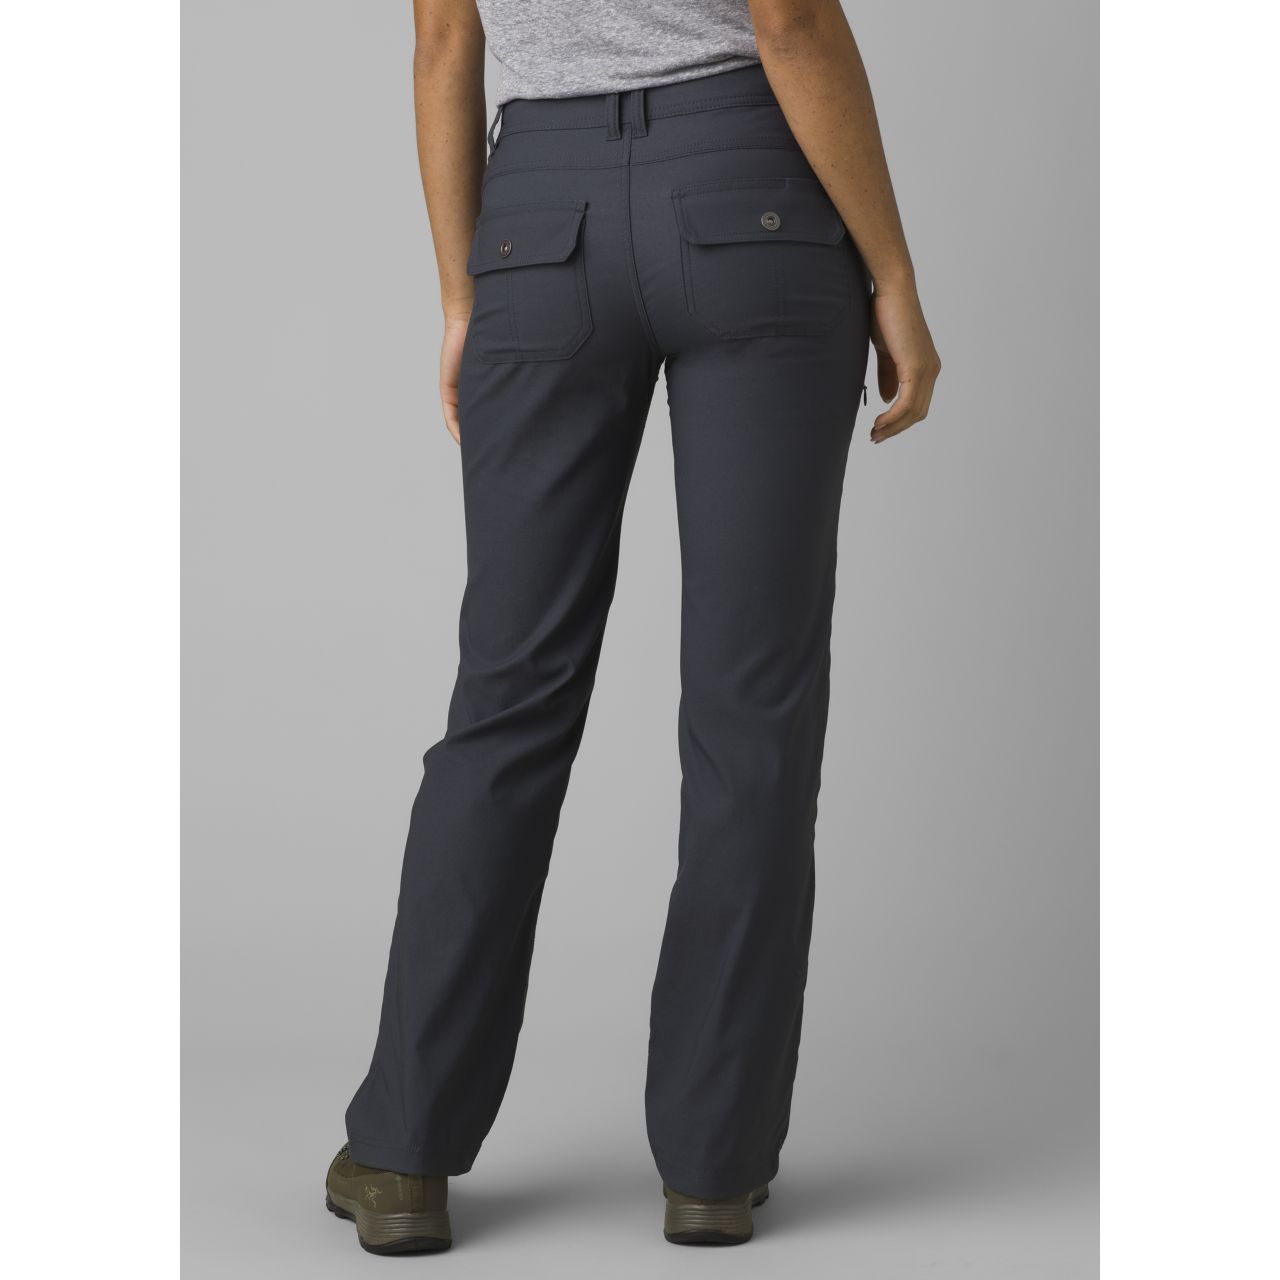 Prana W's Halle Straight II Pants  Outdoor stores, sports, cycling,  skiing, climbing